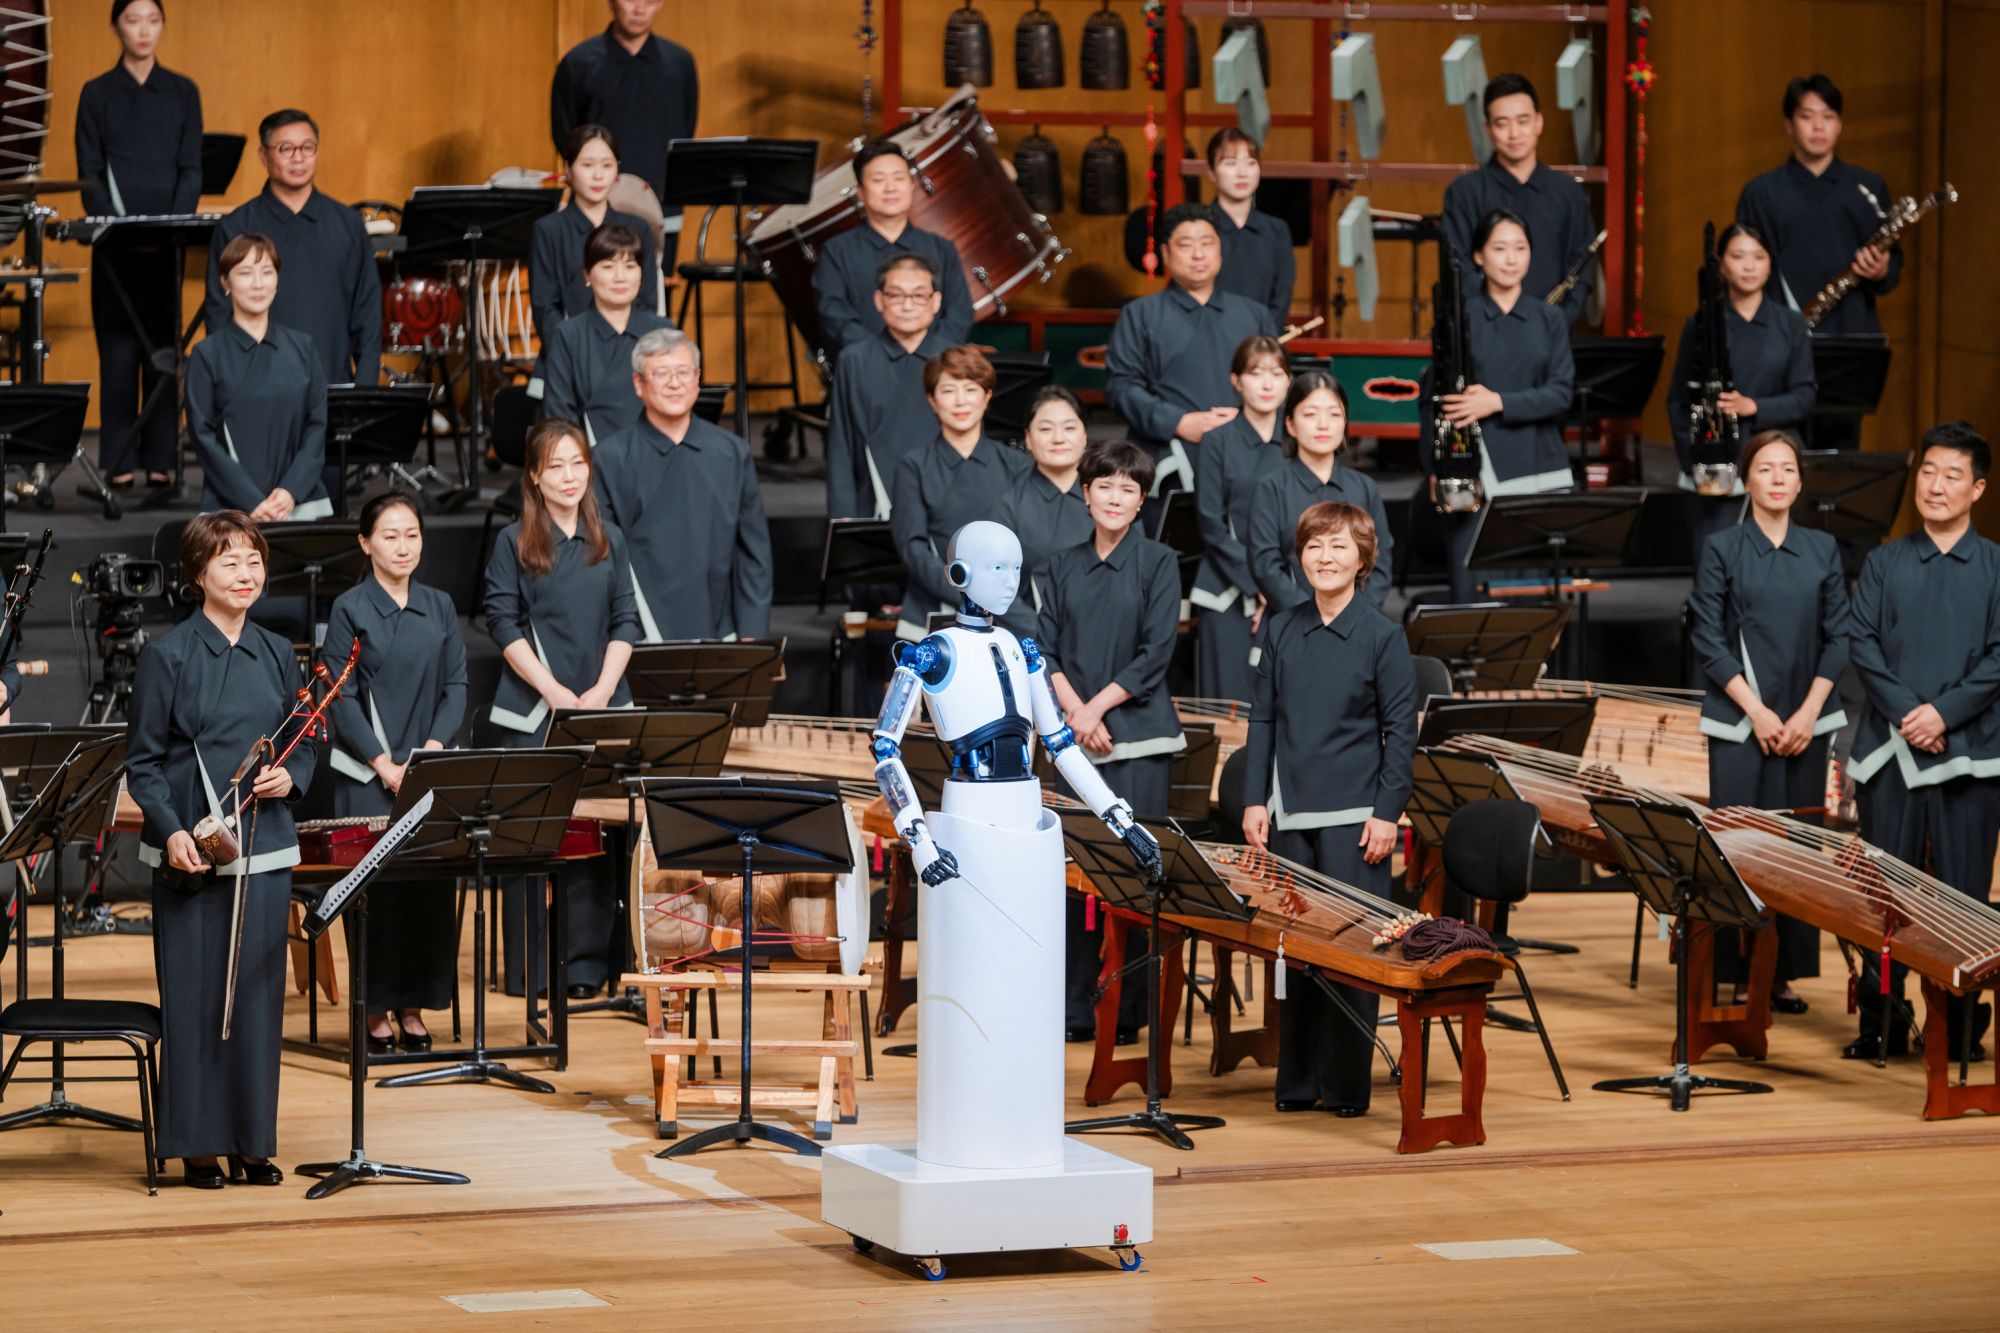 An android robot, EveR 6, takes the conductor's podium to lead a performance by South Korea's national orchestra.